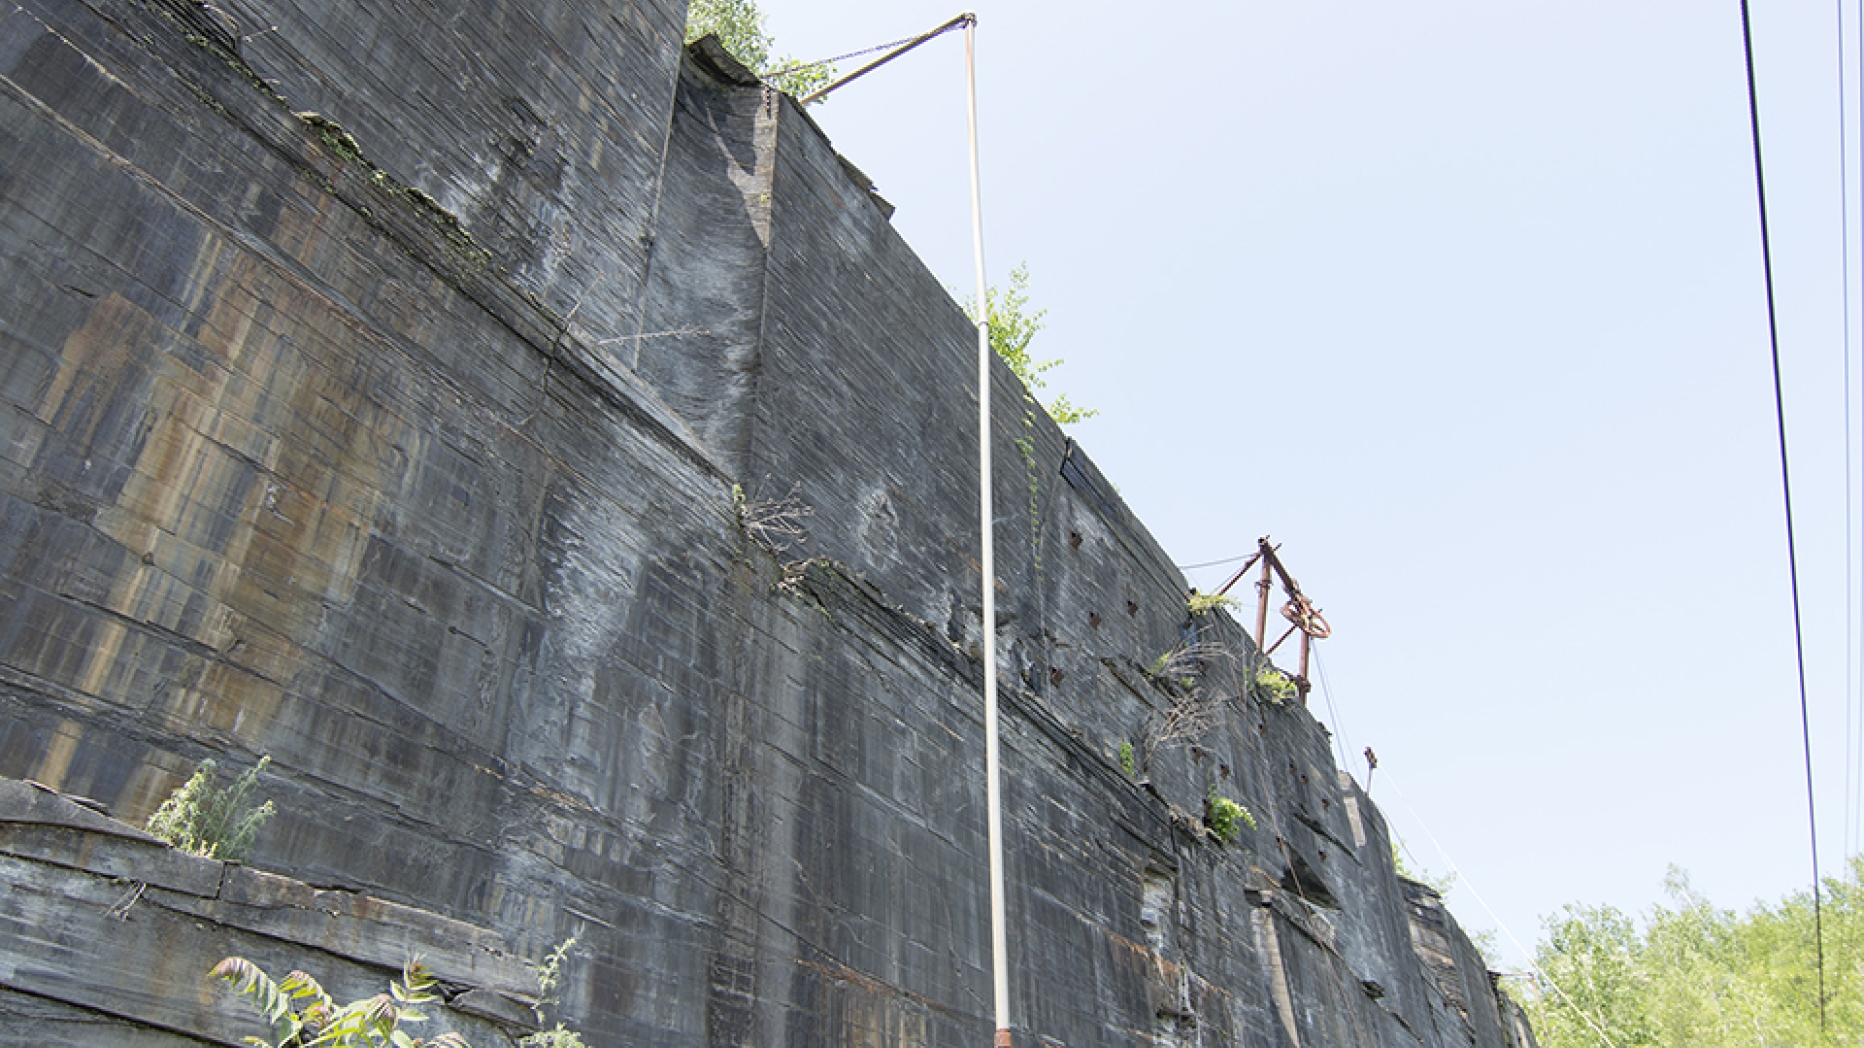 Walls of a quarry with cranes at the top.